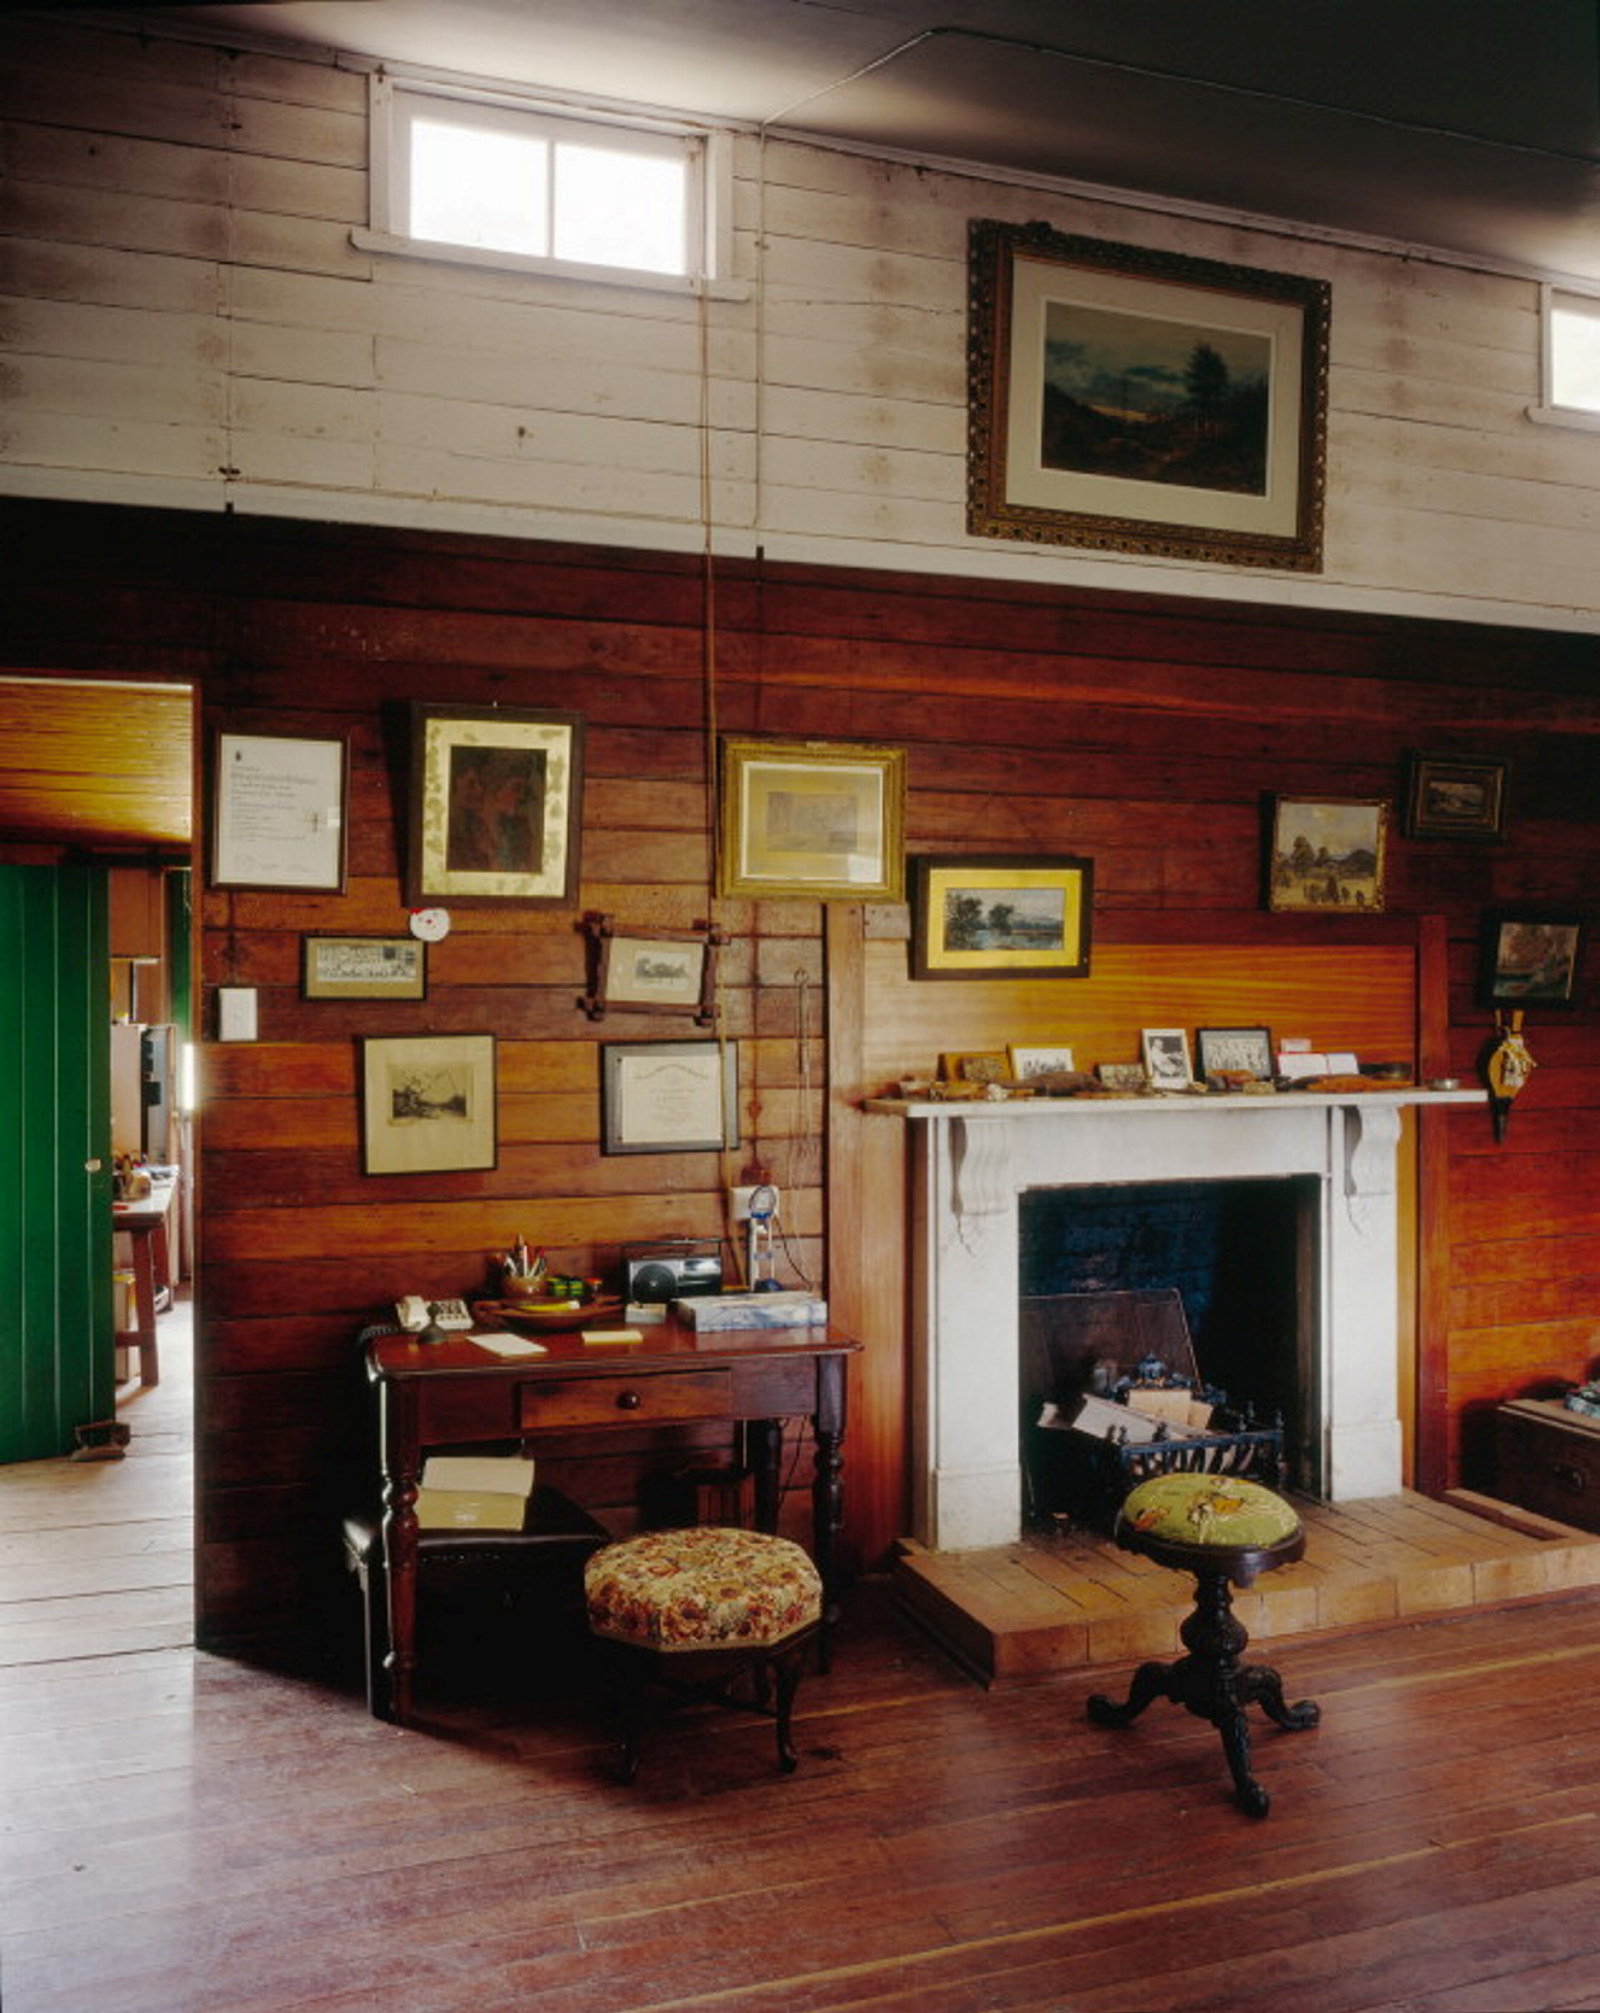 Marks family property 'The Barracks', Camp Mountain, Queensland.